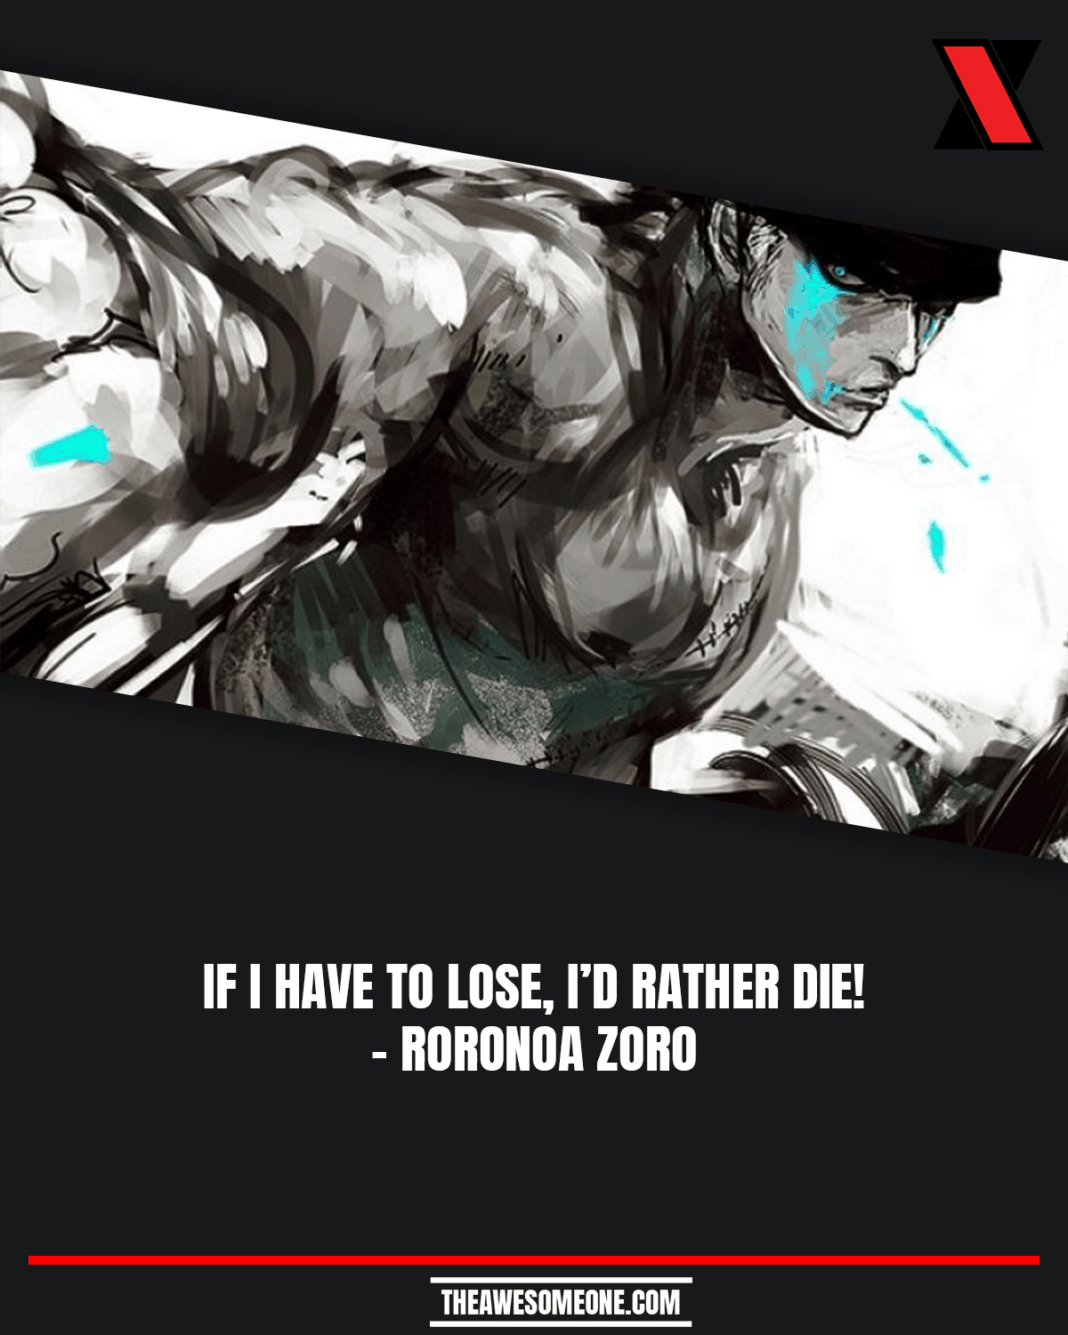 75 One Piece Quotes | Meaningful Quotes | Awesome One